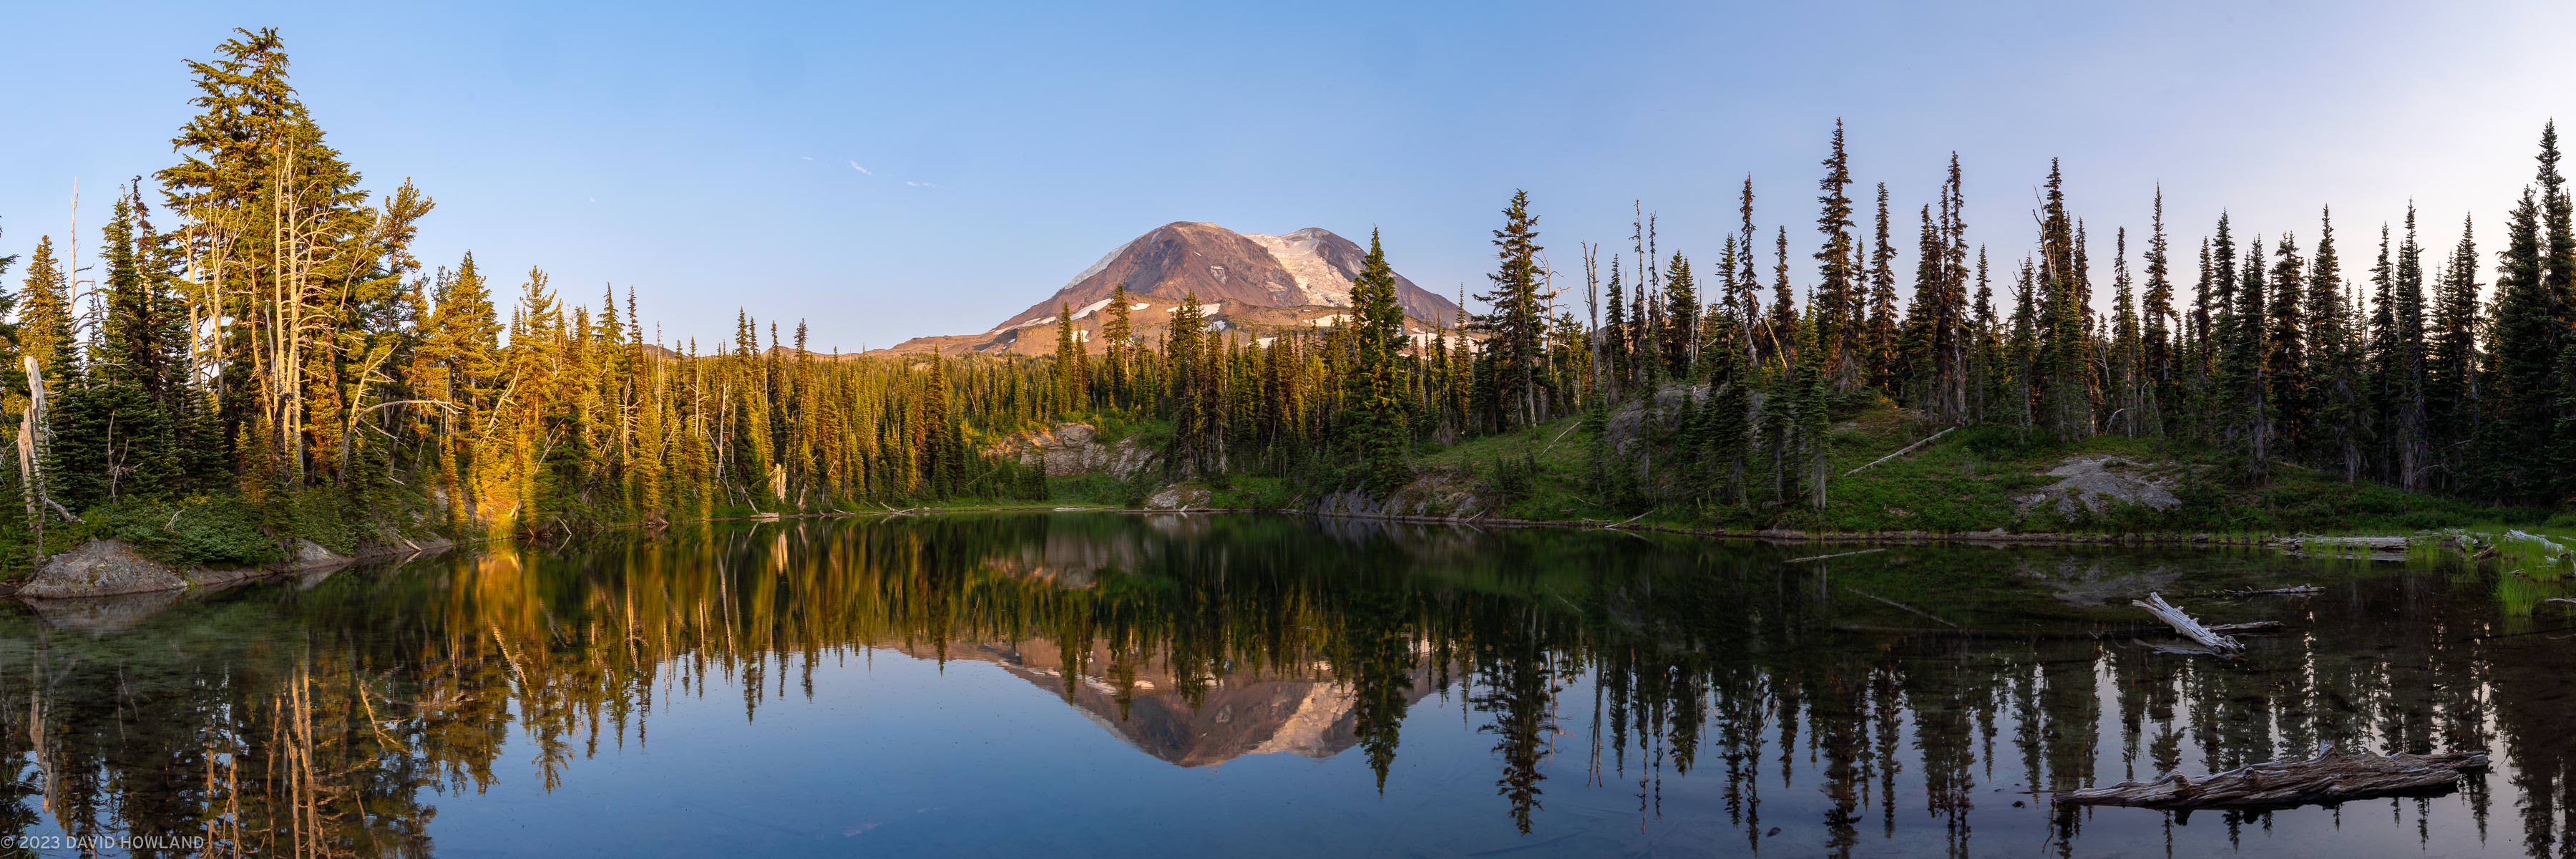 A panorama photo of snow-coverd Mount Adams reflected in the water of an alpine lake at sunset